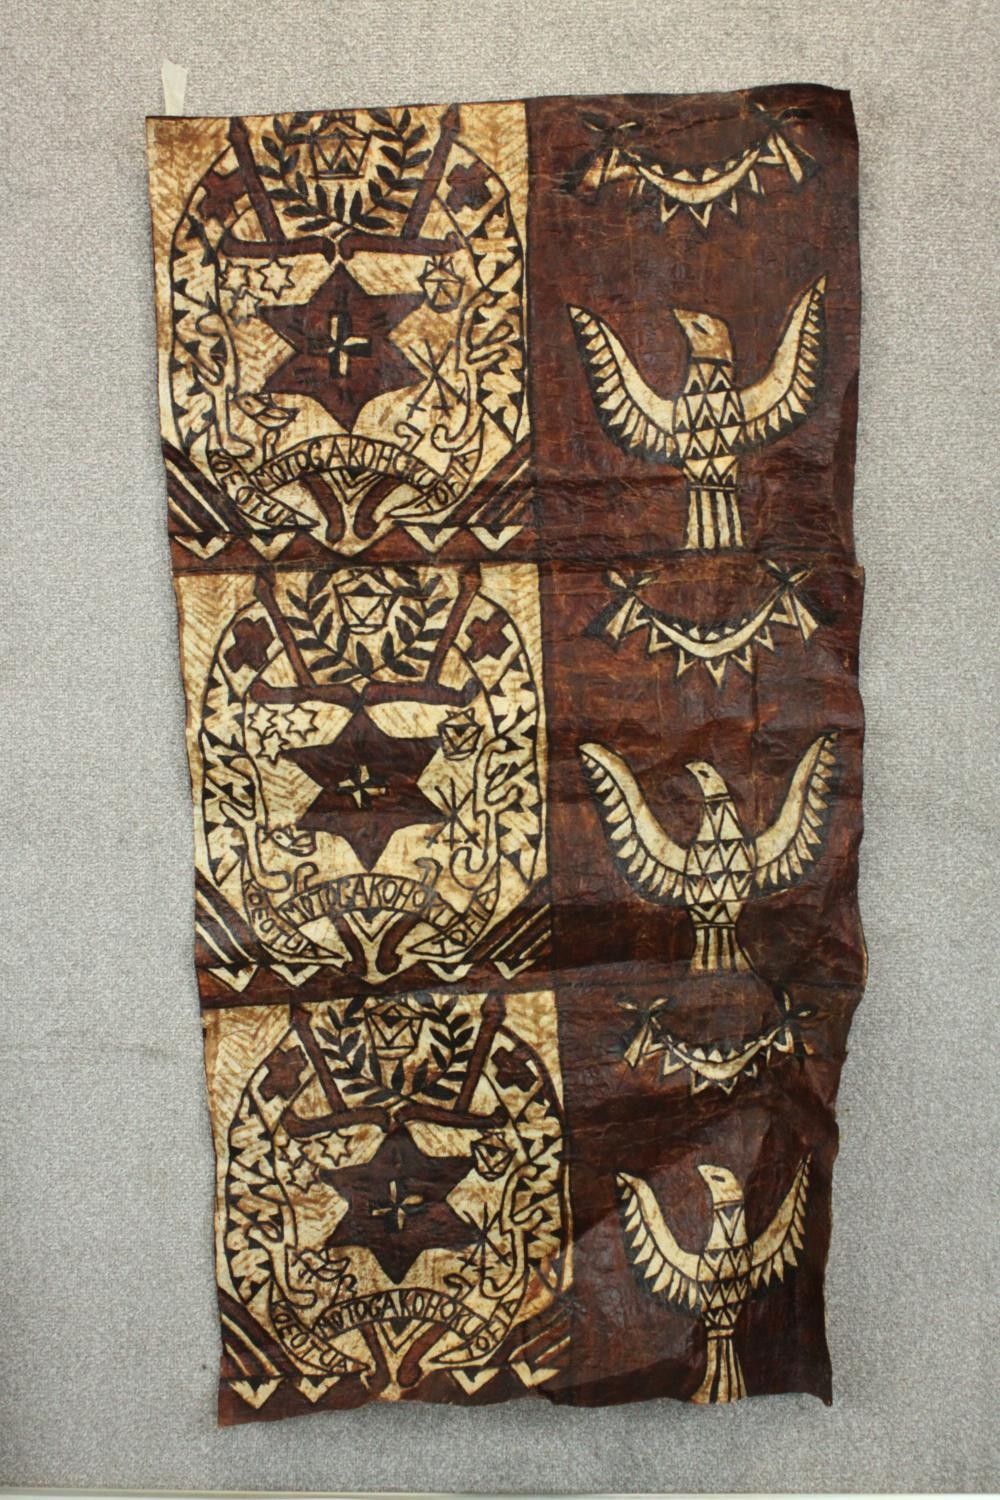 Two large Tonganese Tapa cloth wall hangings, one depicting animals and one depicting stylised trees - Image 3 of 10